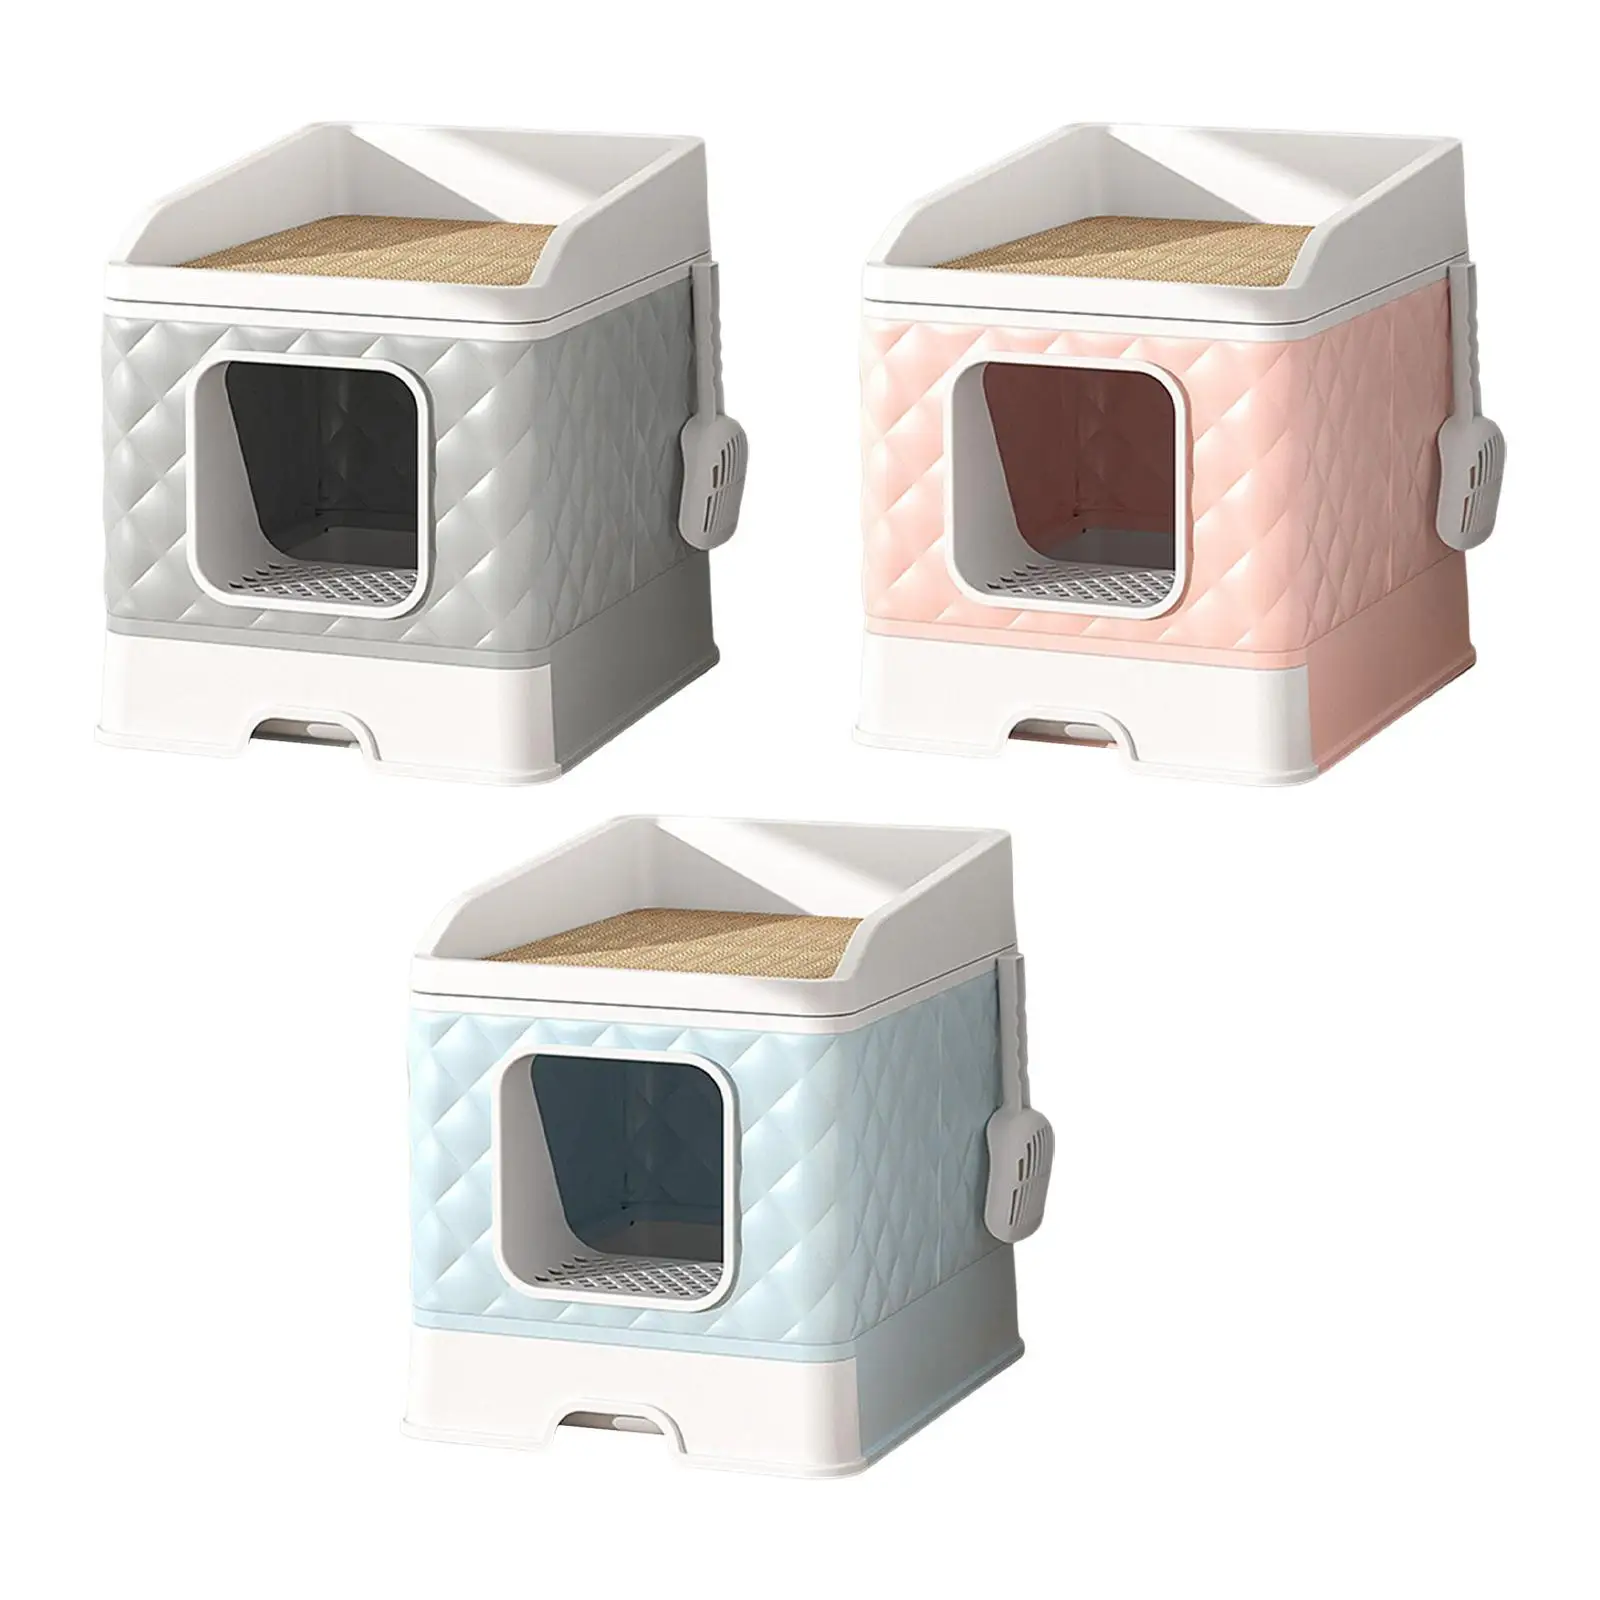 Cat Litter Box Portable Foldable Pet Supplies Cat House Drawer Type Removeable Durable Pet Toilet for Small and Large Cats